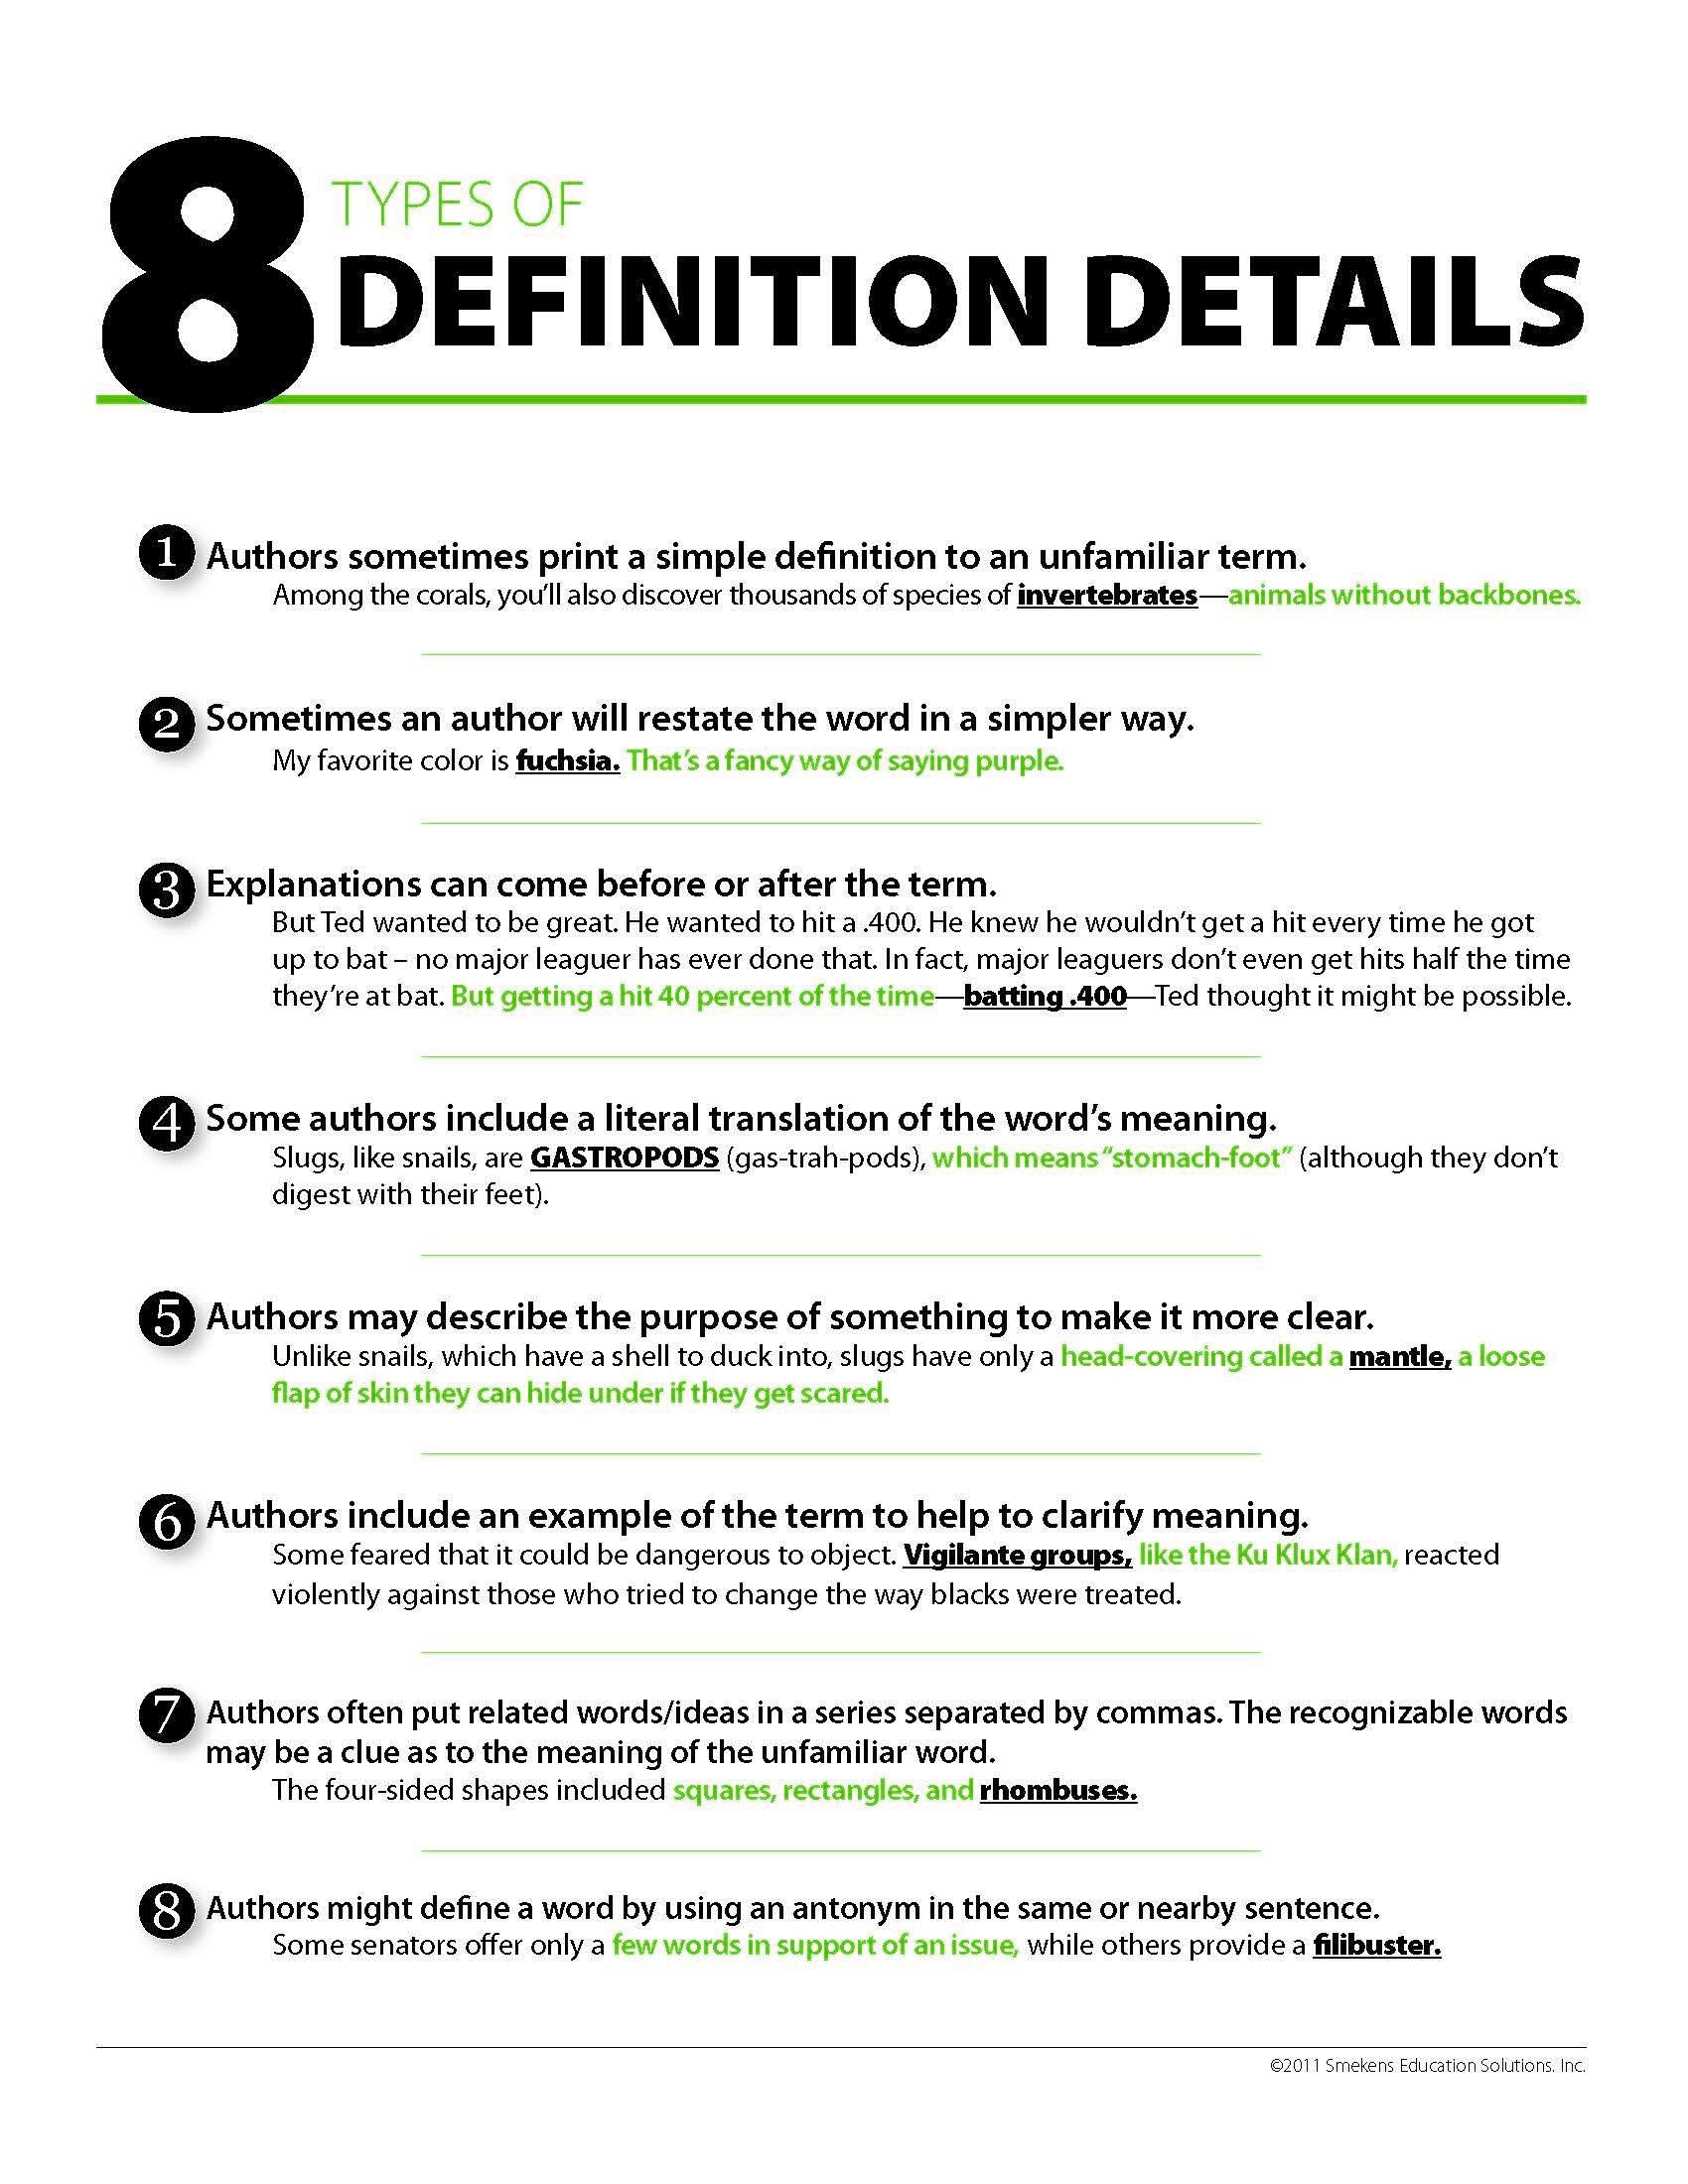 8 Types of Definition Details